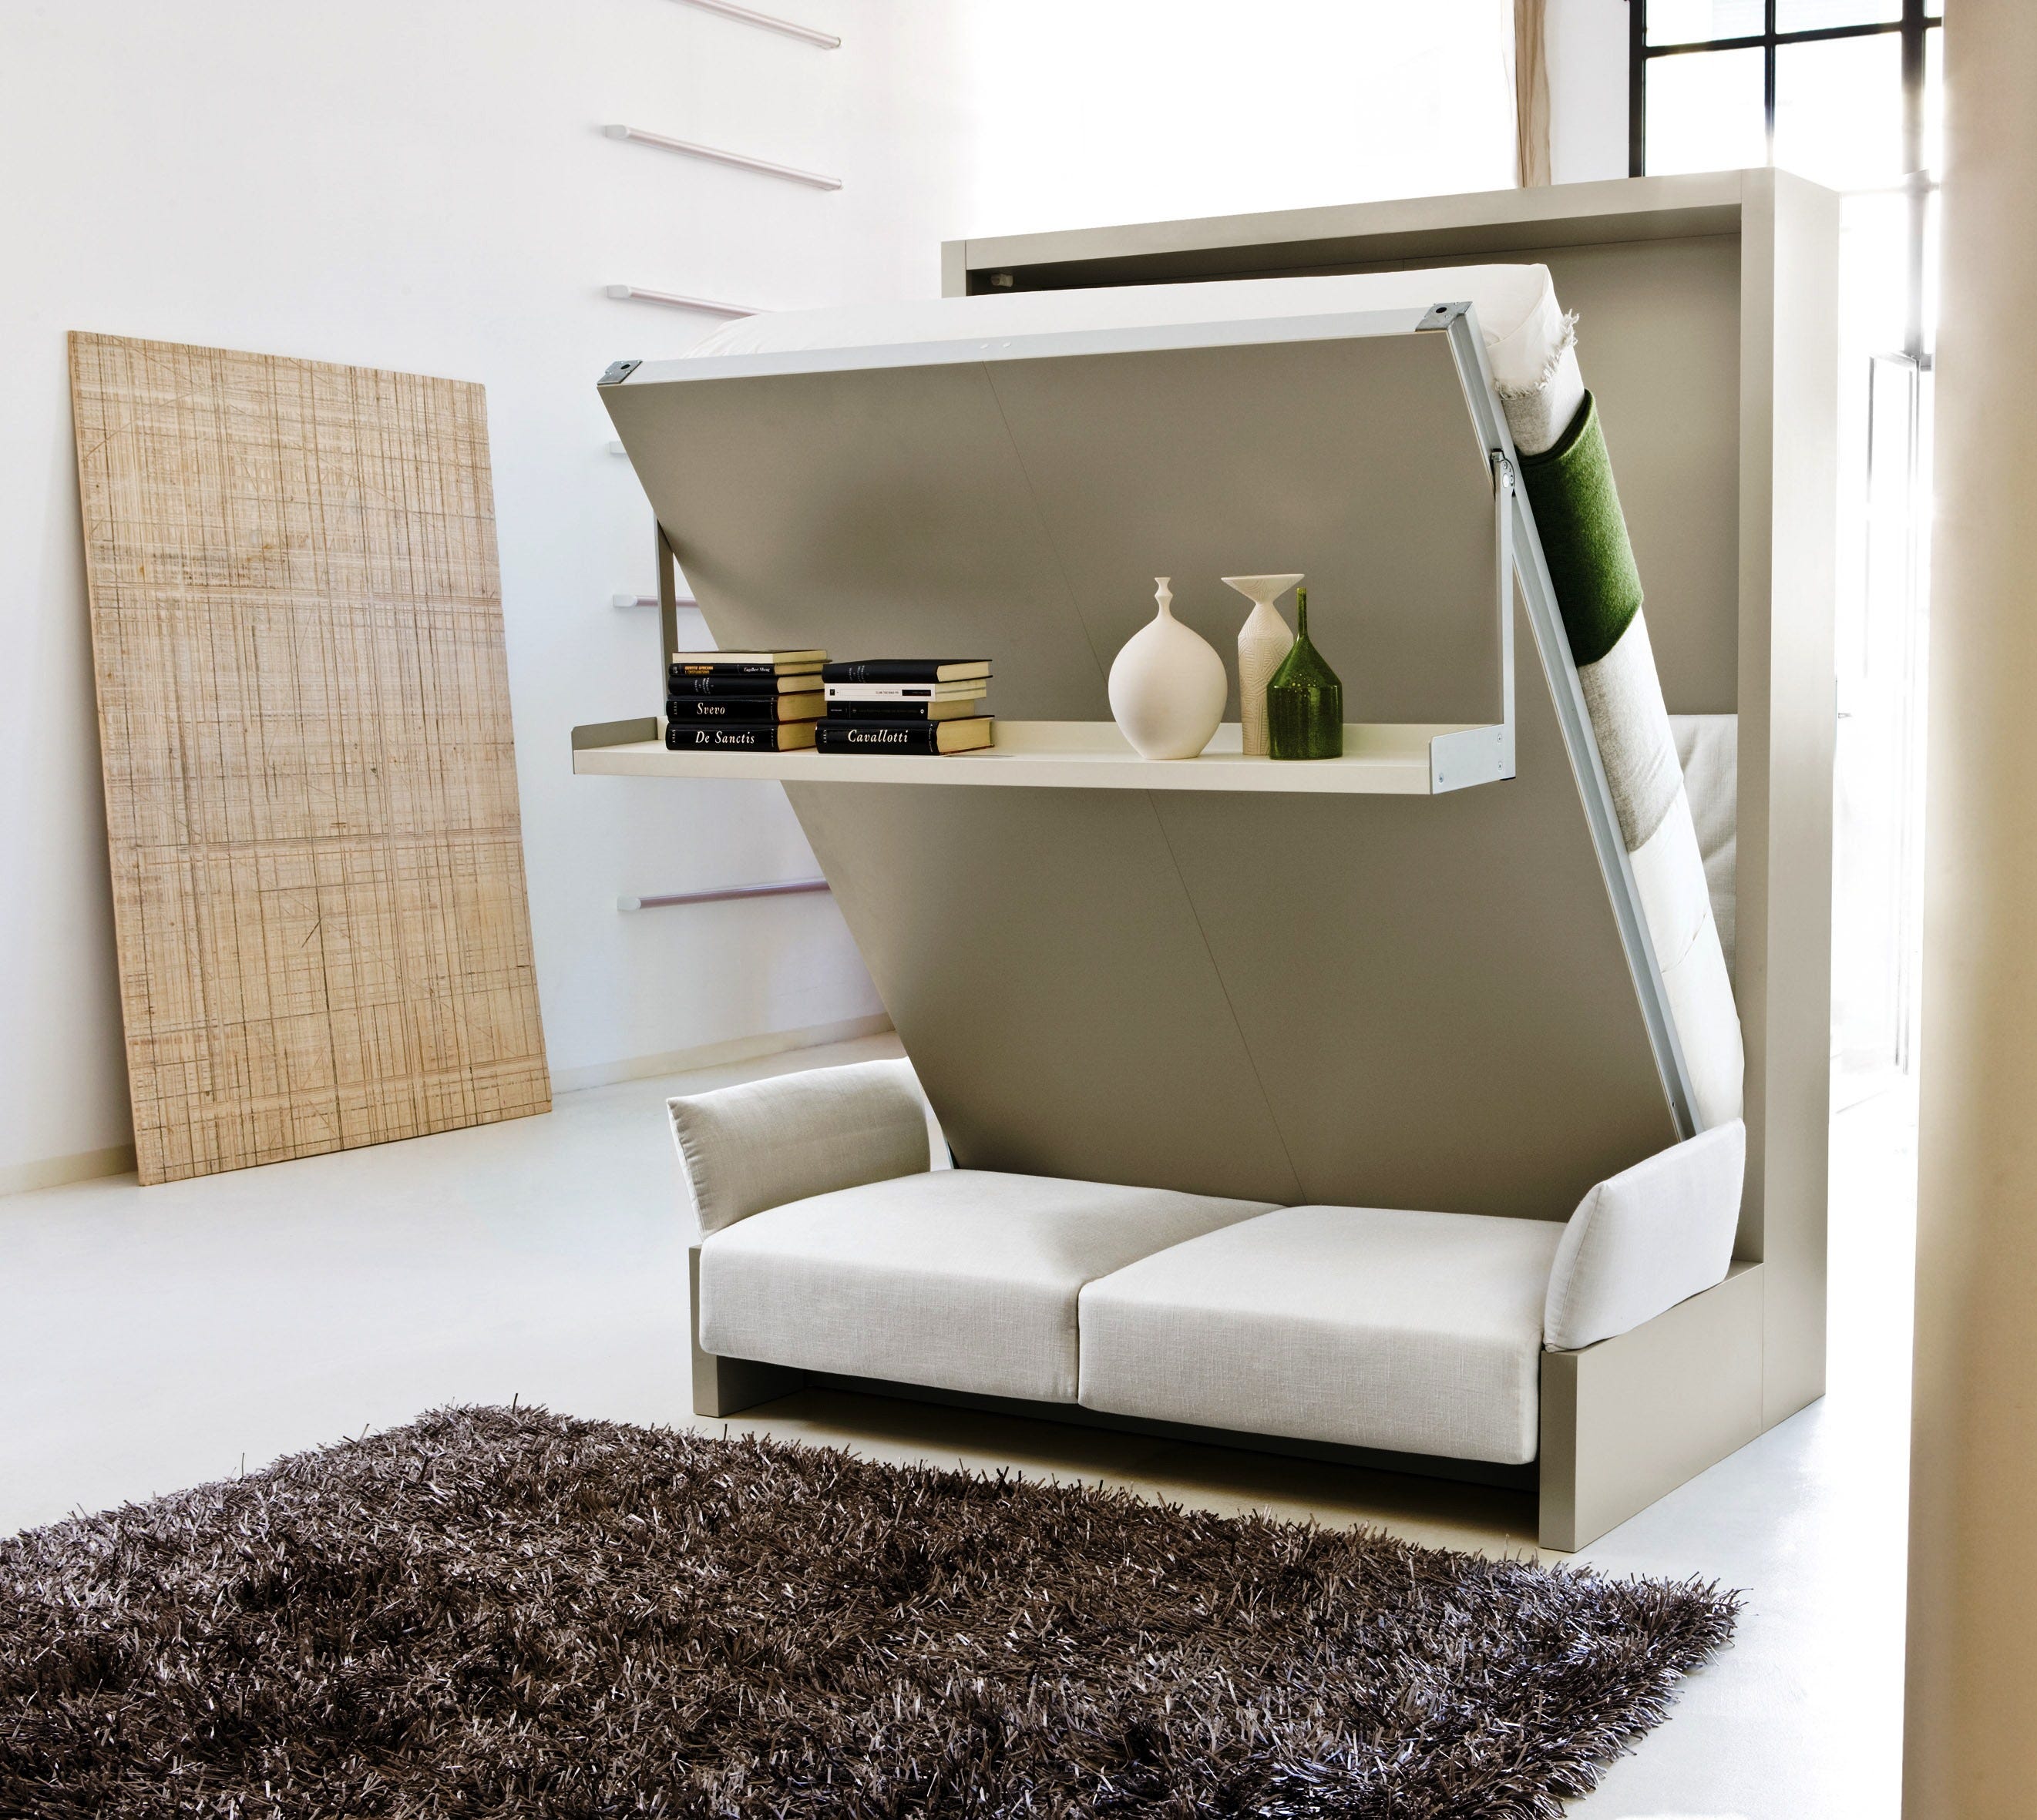 Space efficient Furniture Designs For Small Homes